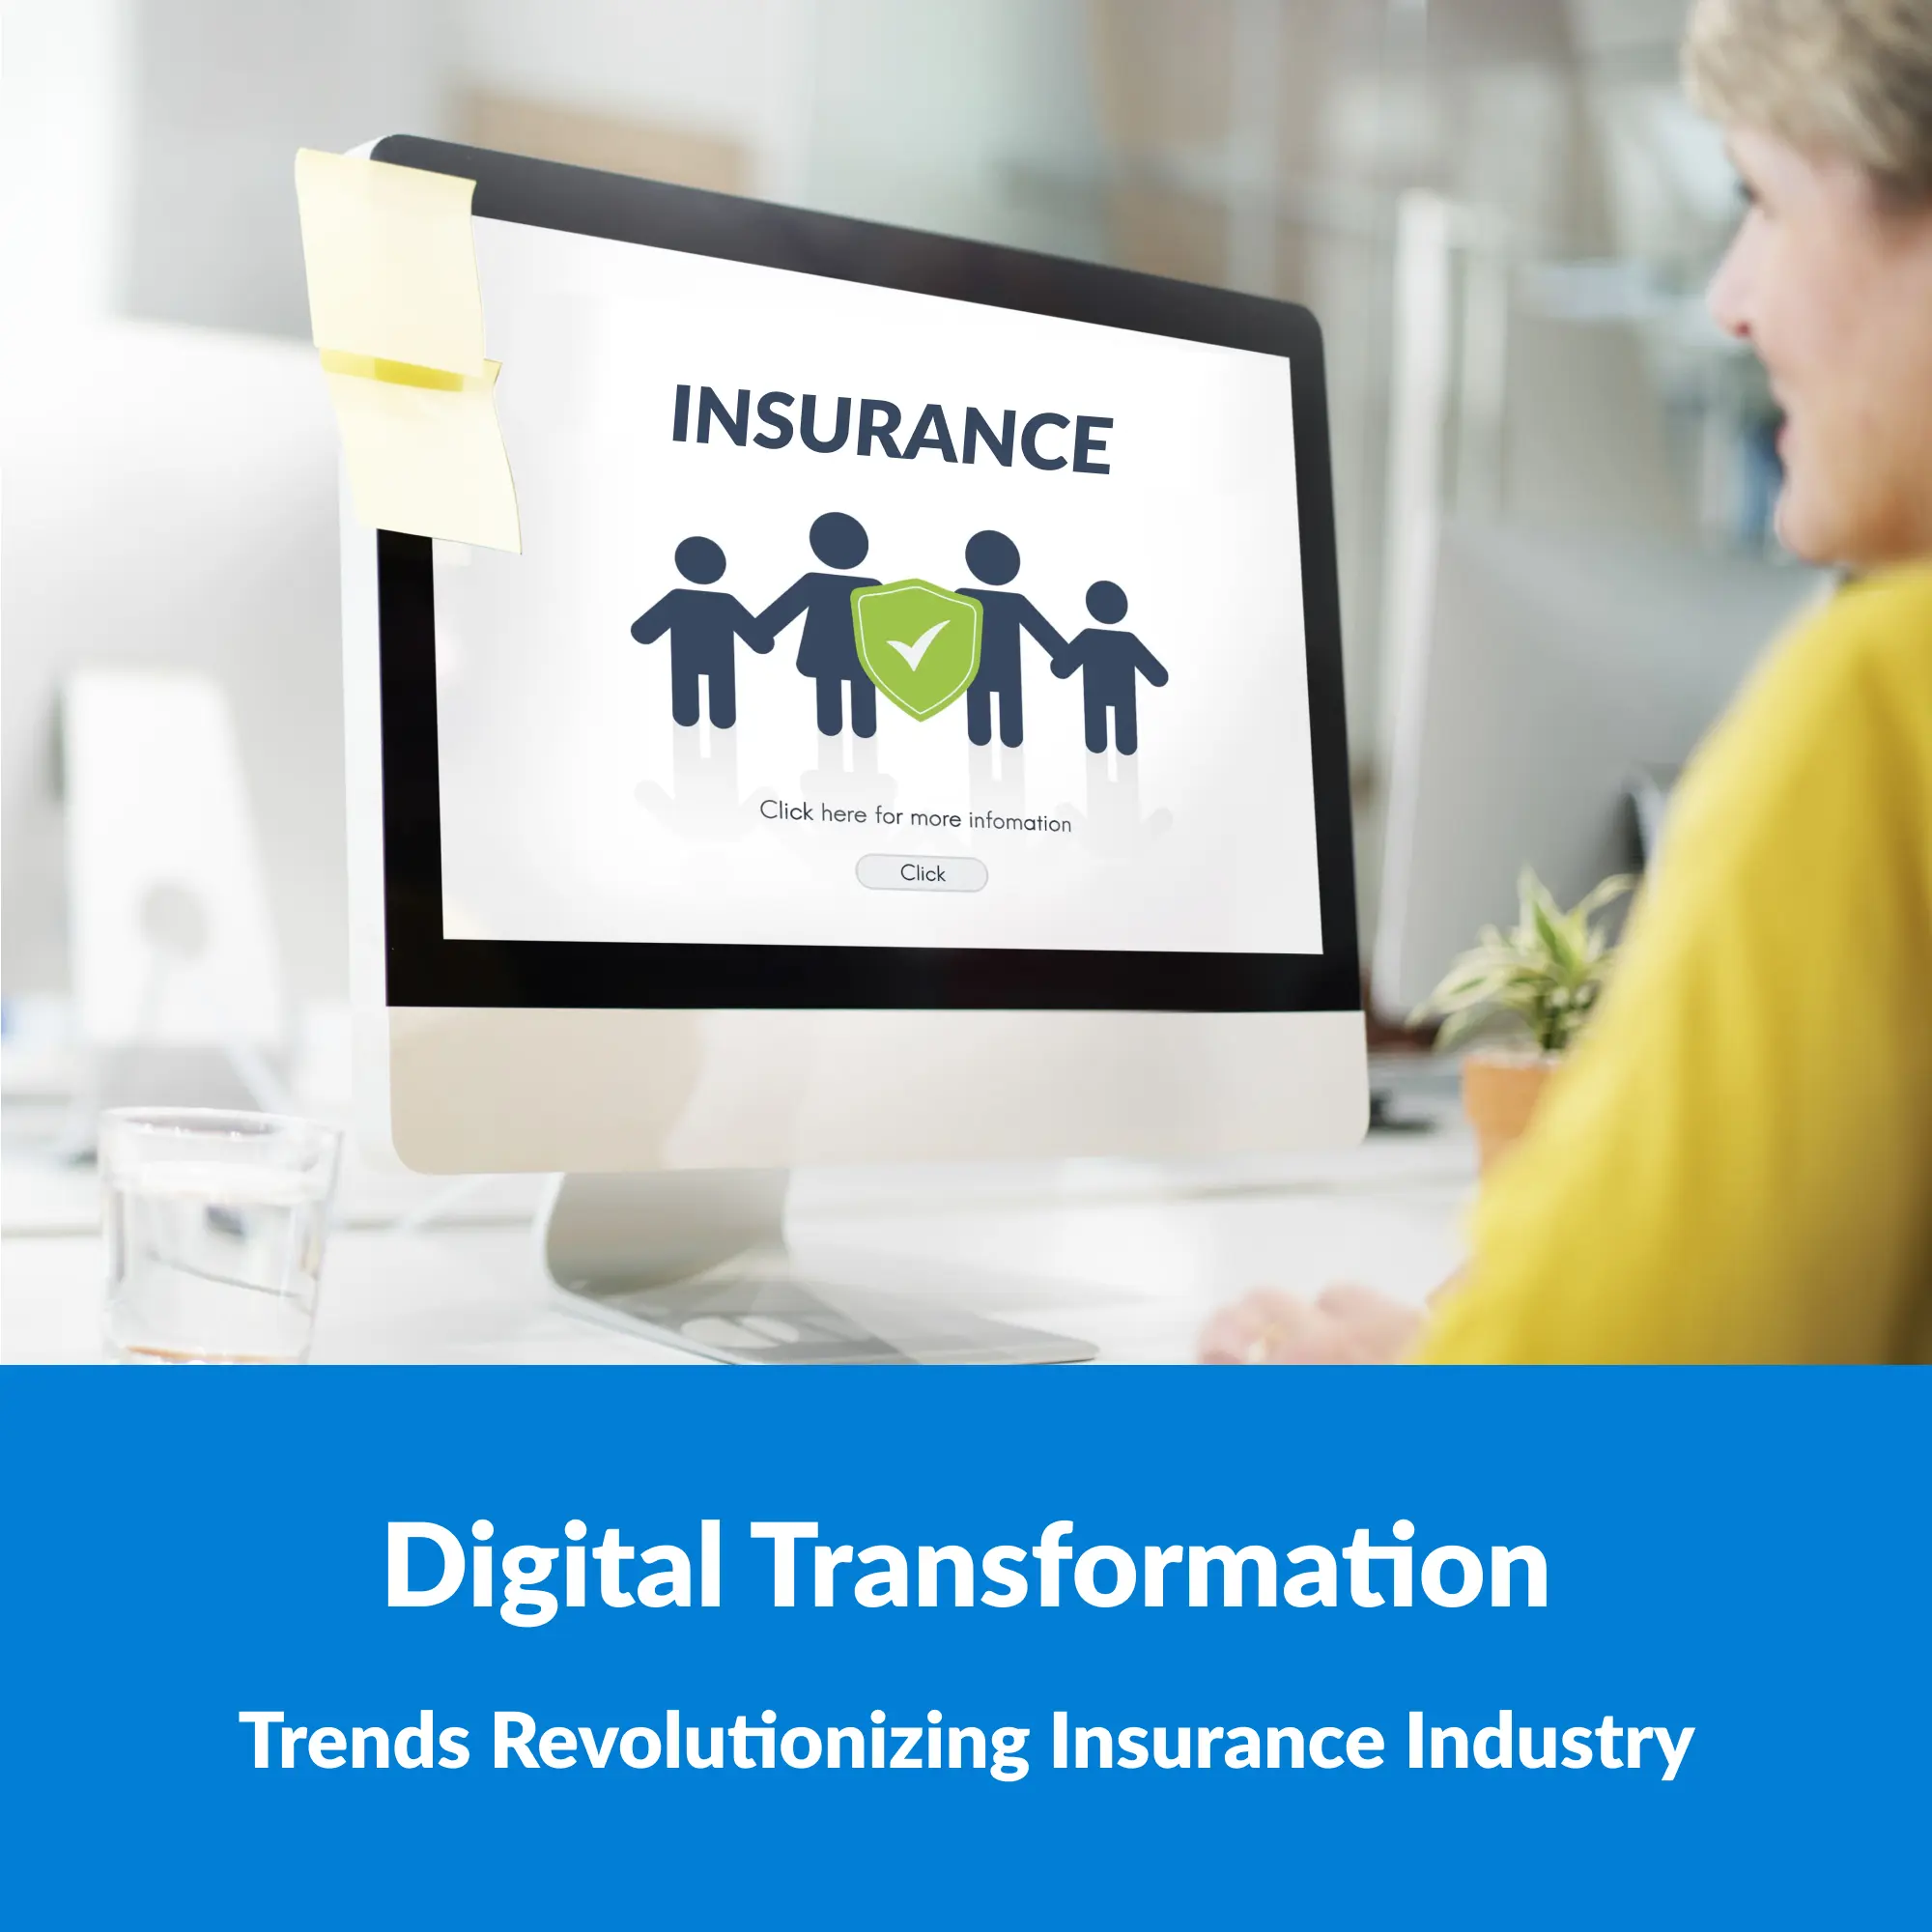 digital transformation, insurance industry, challenges and opportunities in insurtech marketing